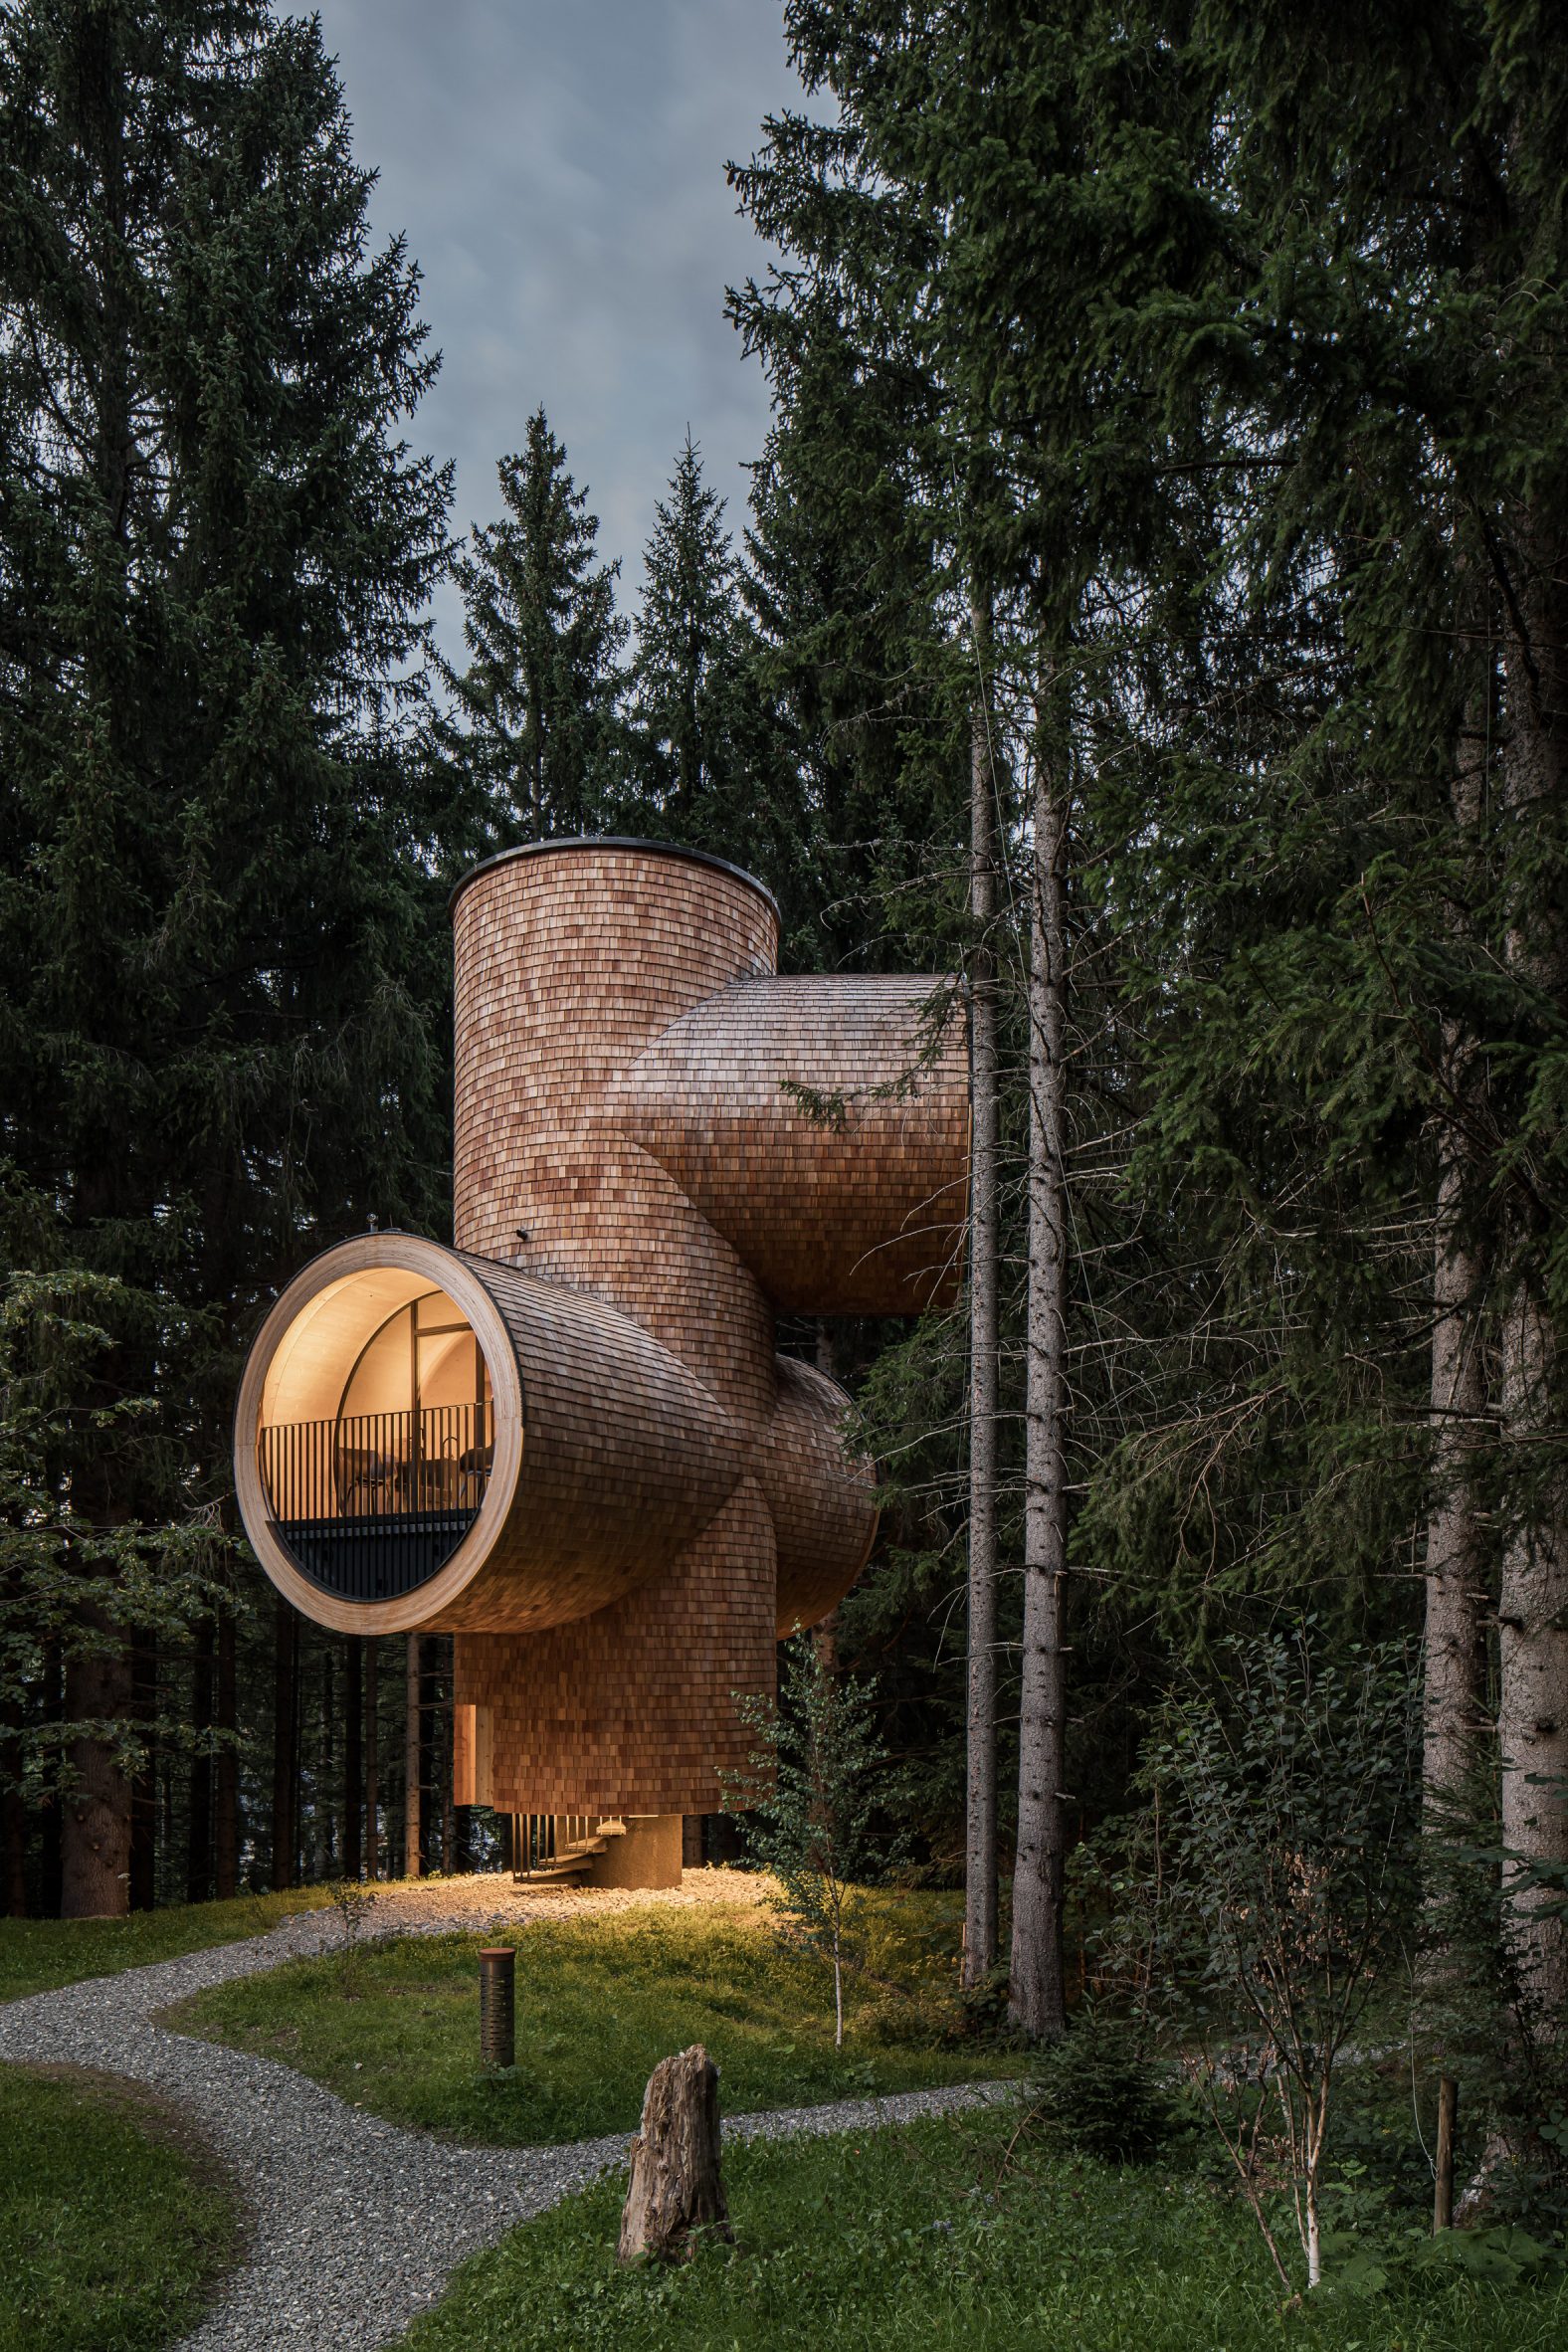 Precht and Baumbau designed Bert in 2019 with the concept of a treehouse